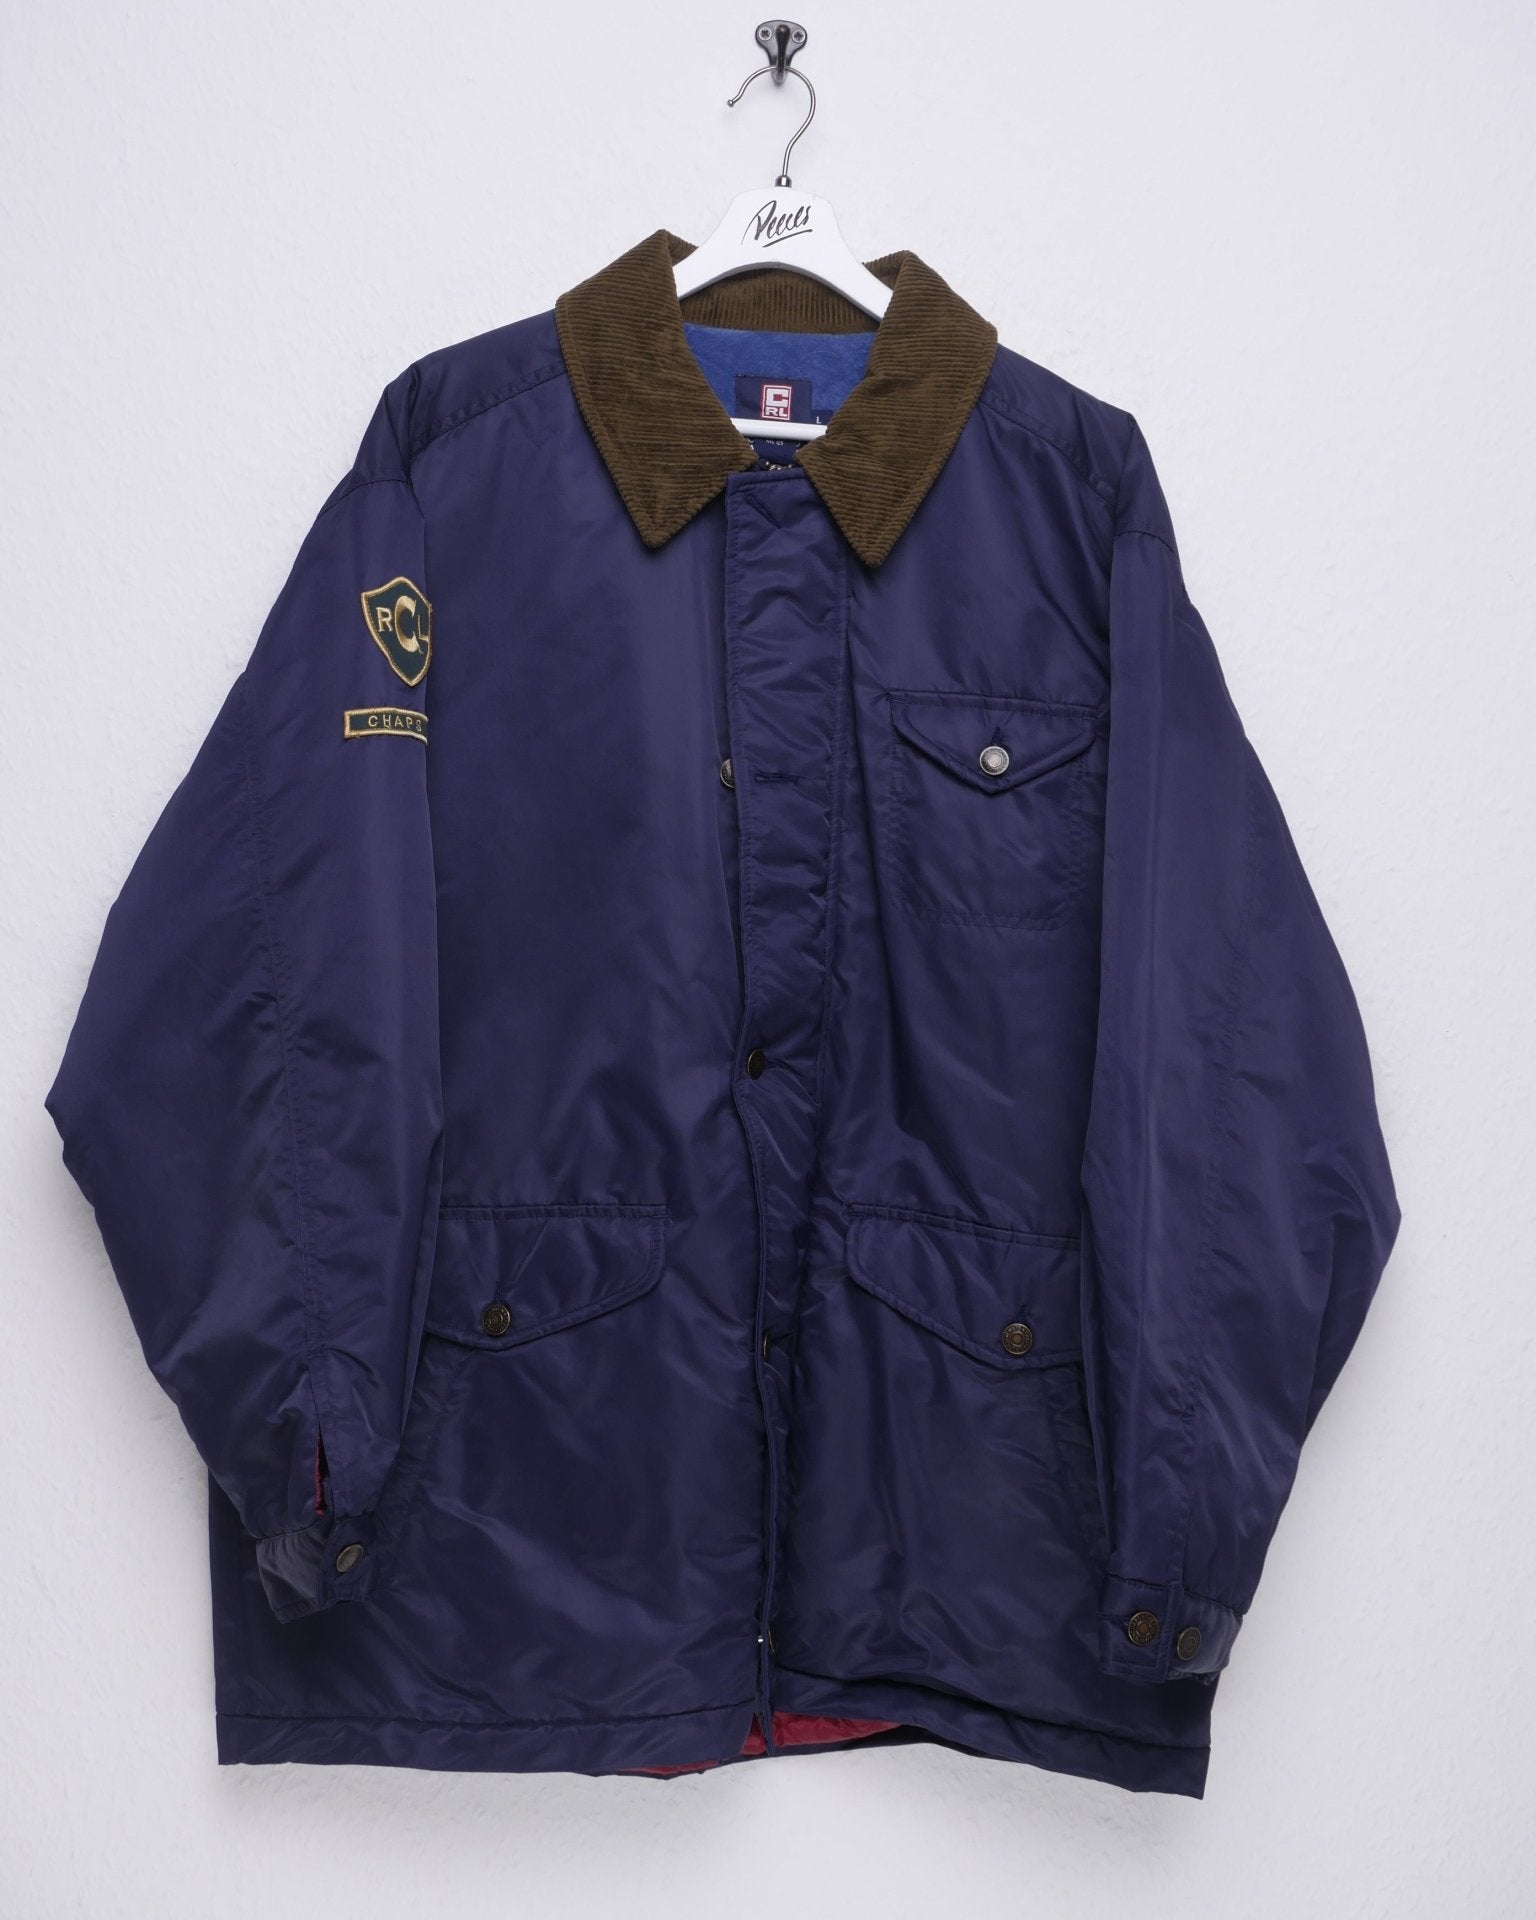 Chaps by Ralph Lauren embroidered Logo navy heavy Jacket - Peeces